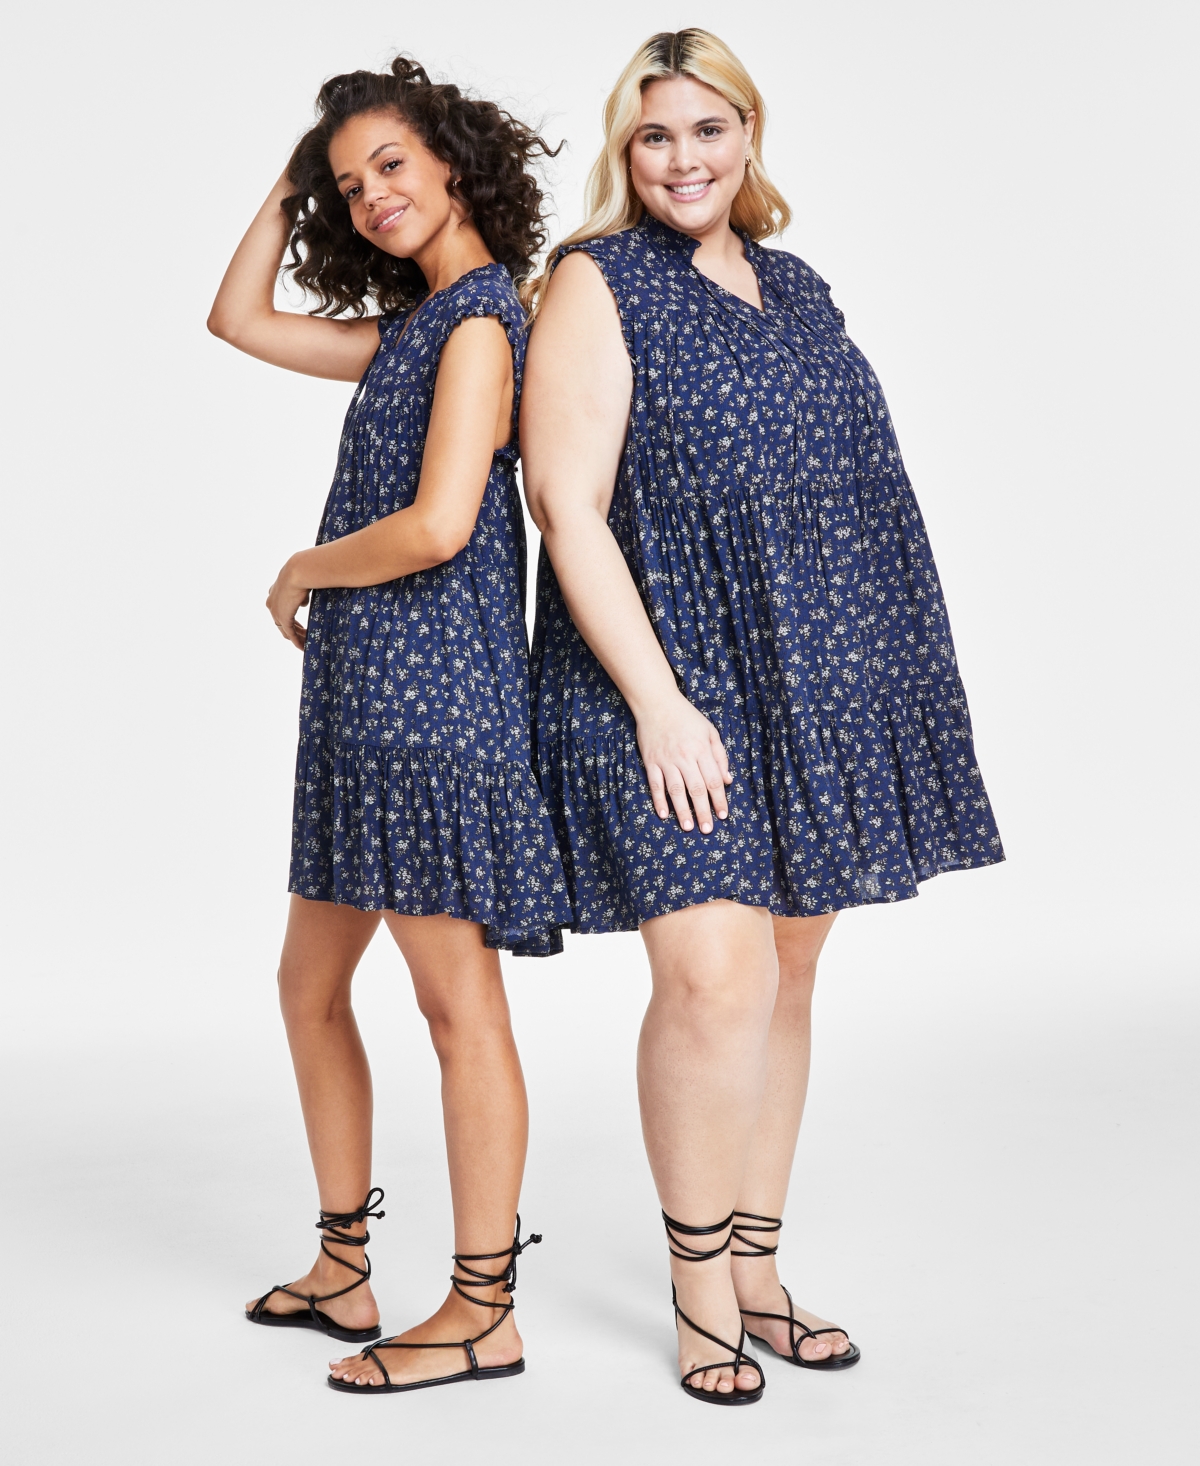 Shop And Now This Women's Sleeveless Tiered Dress, Xxs-4x, Created For Macy's In Navy Floral